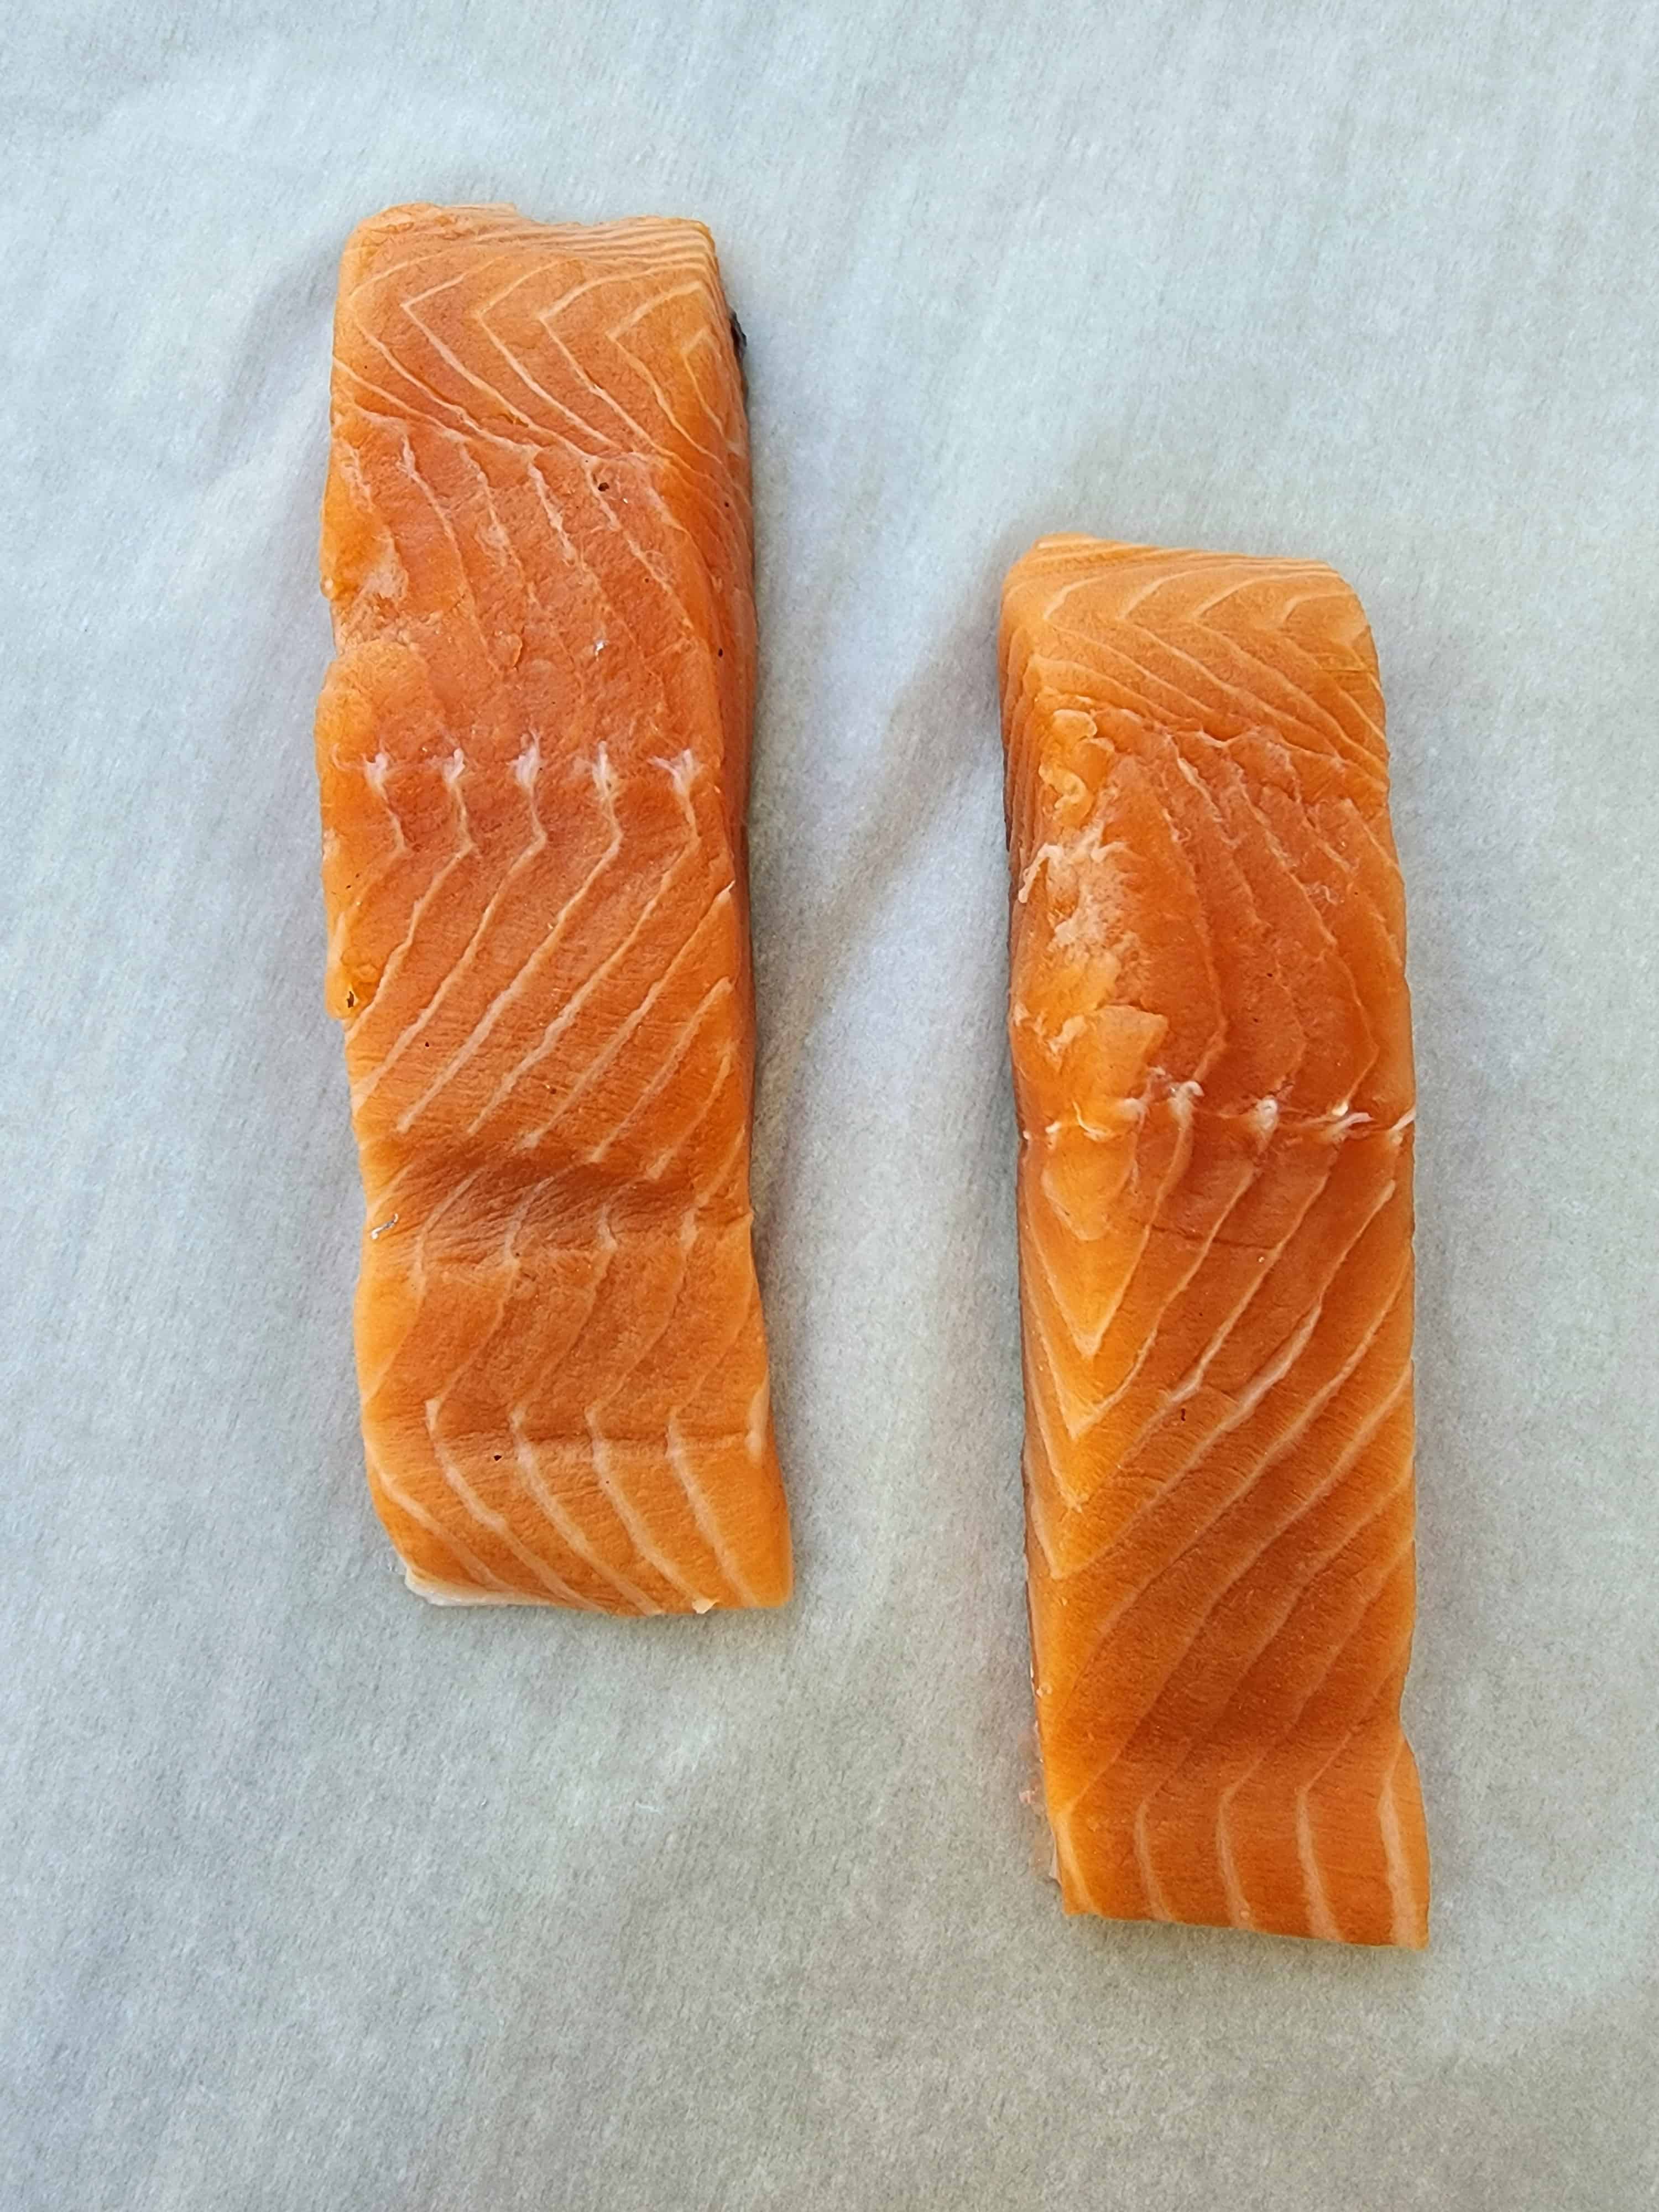 2 salmon fillets patted dry